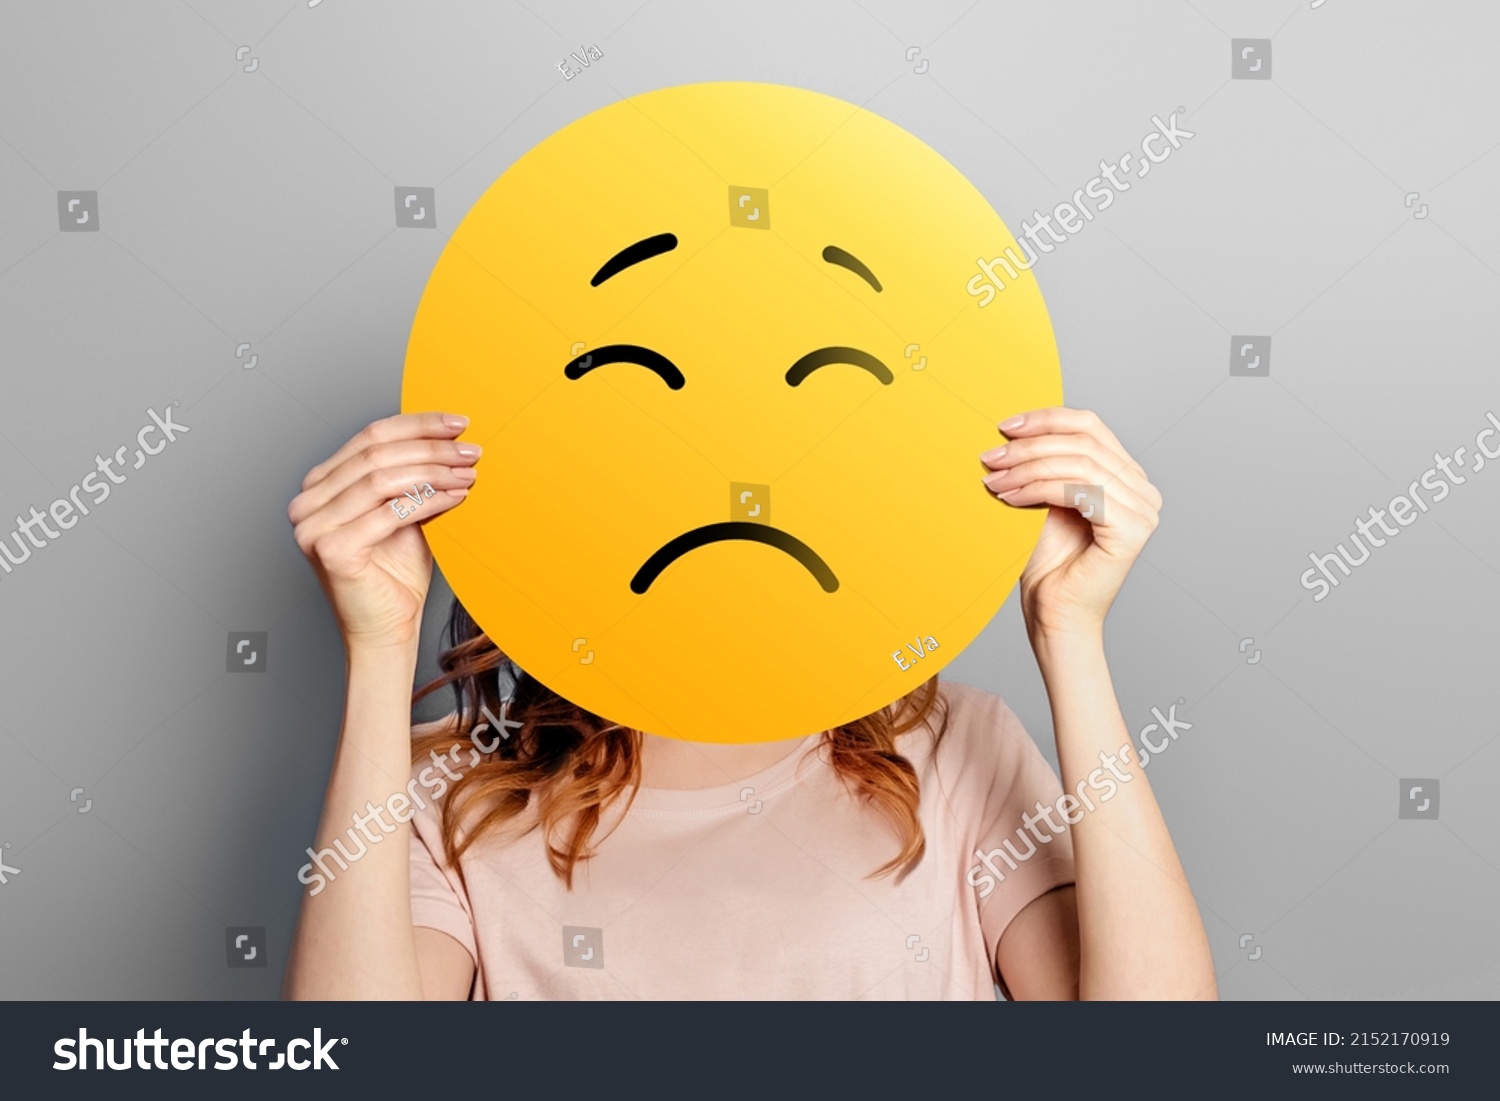 Sad emoji. Girl holds a yellow emoticon with sad face isolated on a gray background. unhappy emoji #2152170919